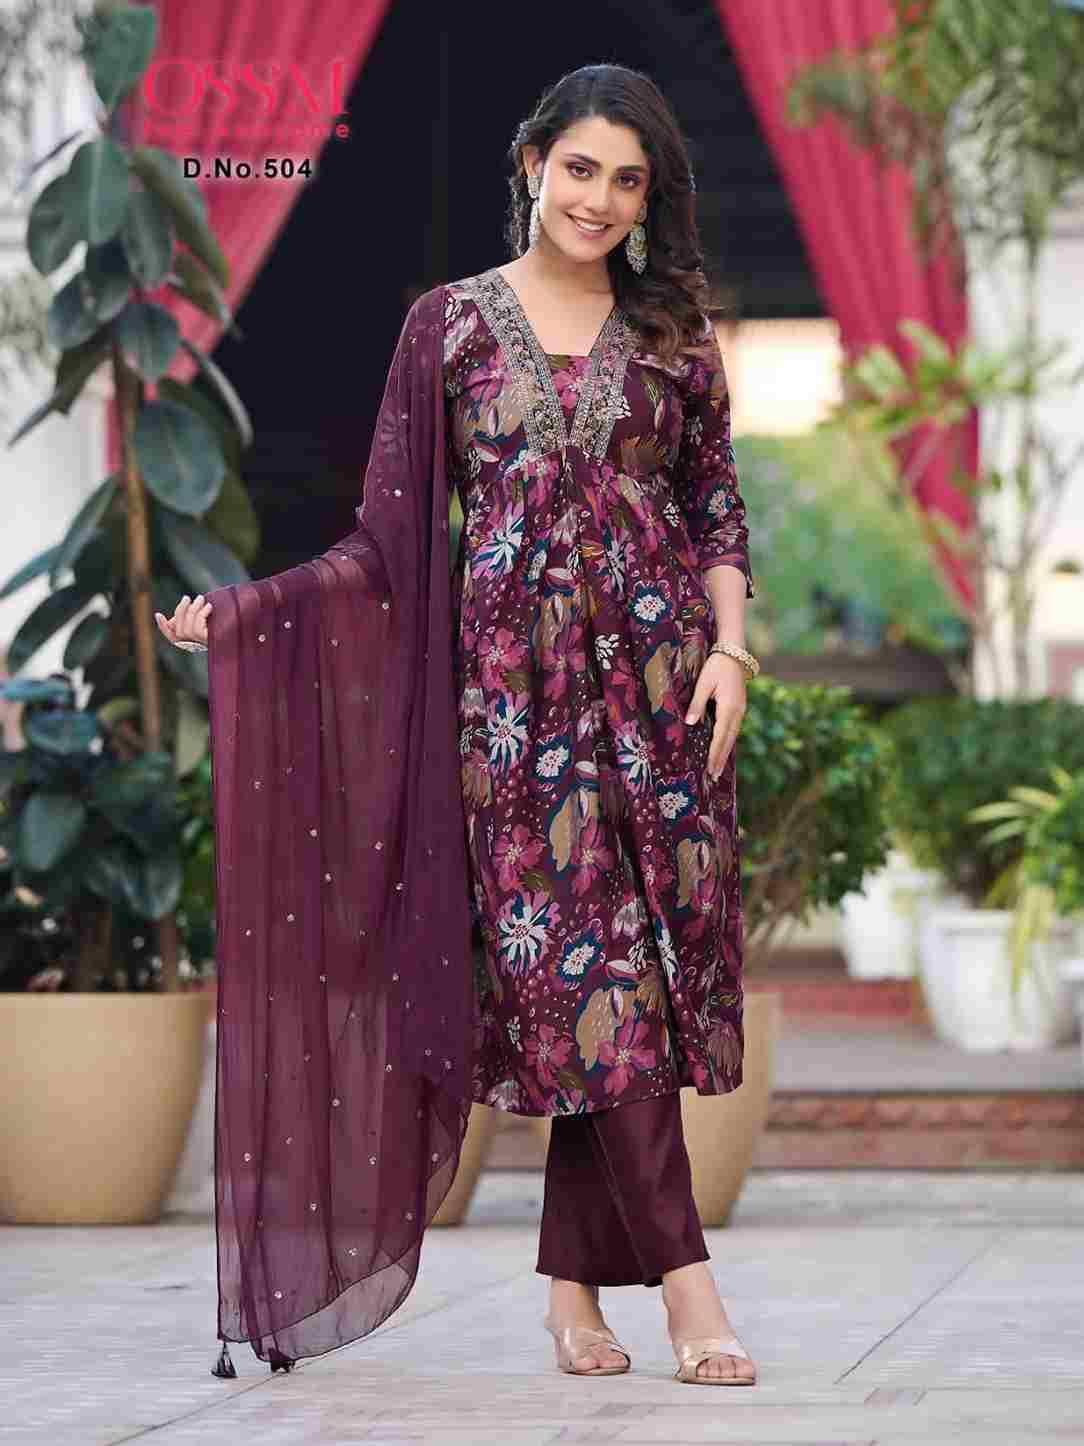 Mantra Vol-2 By Ossm 501 To 506 Series Beautiful Stylish Festive Suits Fancy Colorful Casual Wear & Ethnic Wear & Ready To Wear Modal Chanderi Dresses At Wholesale Price